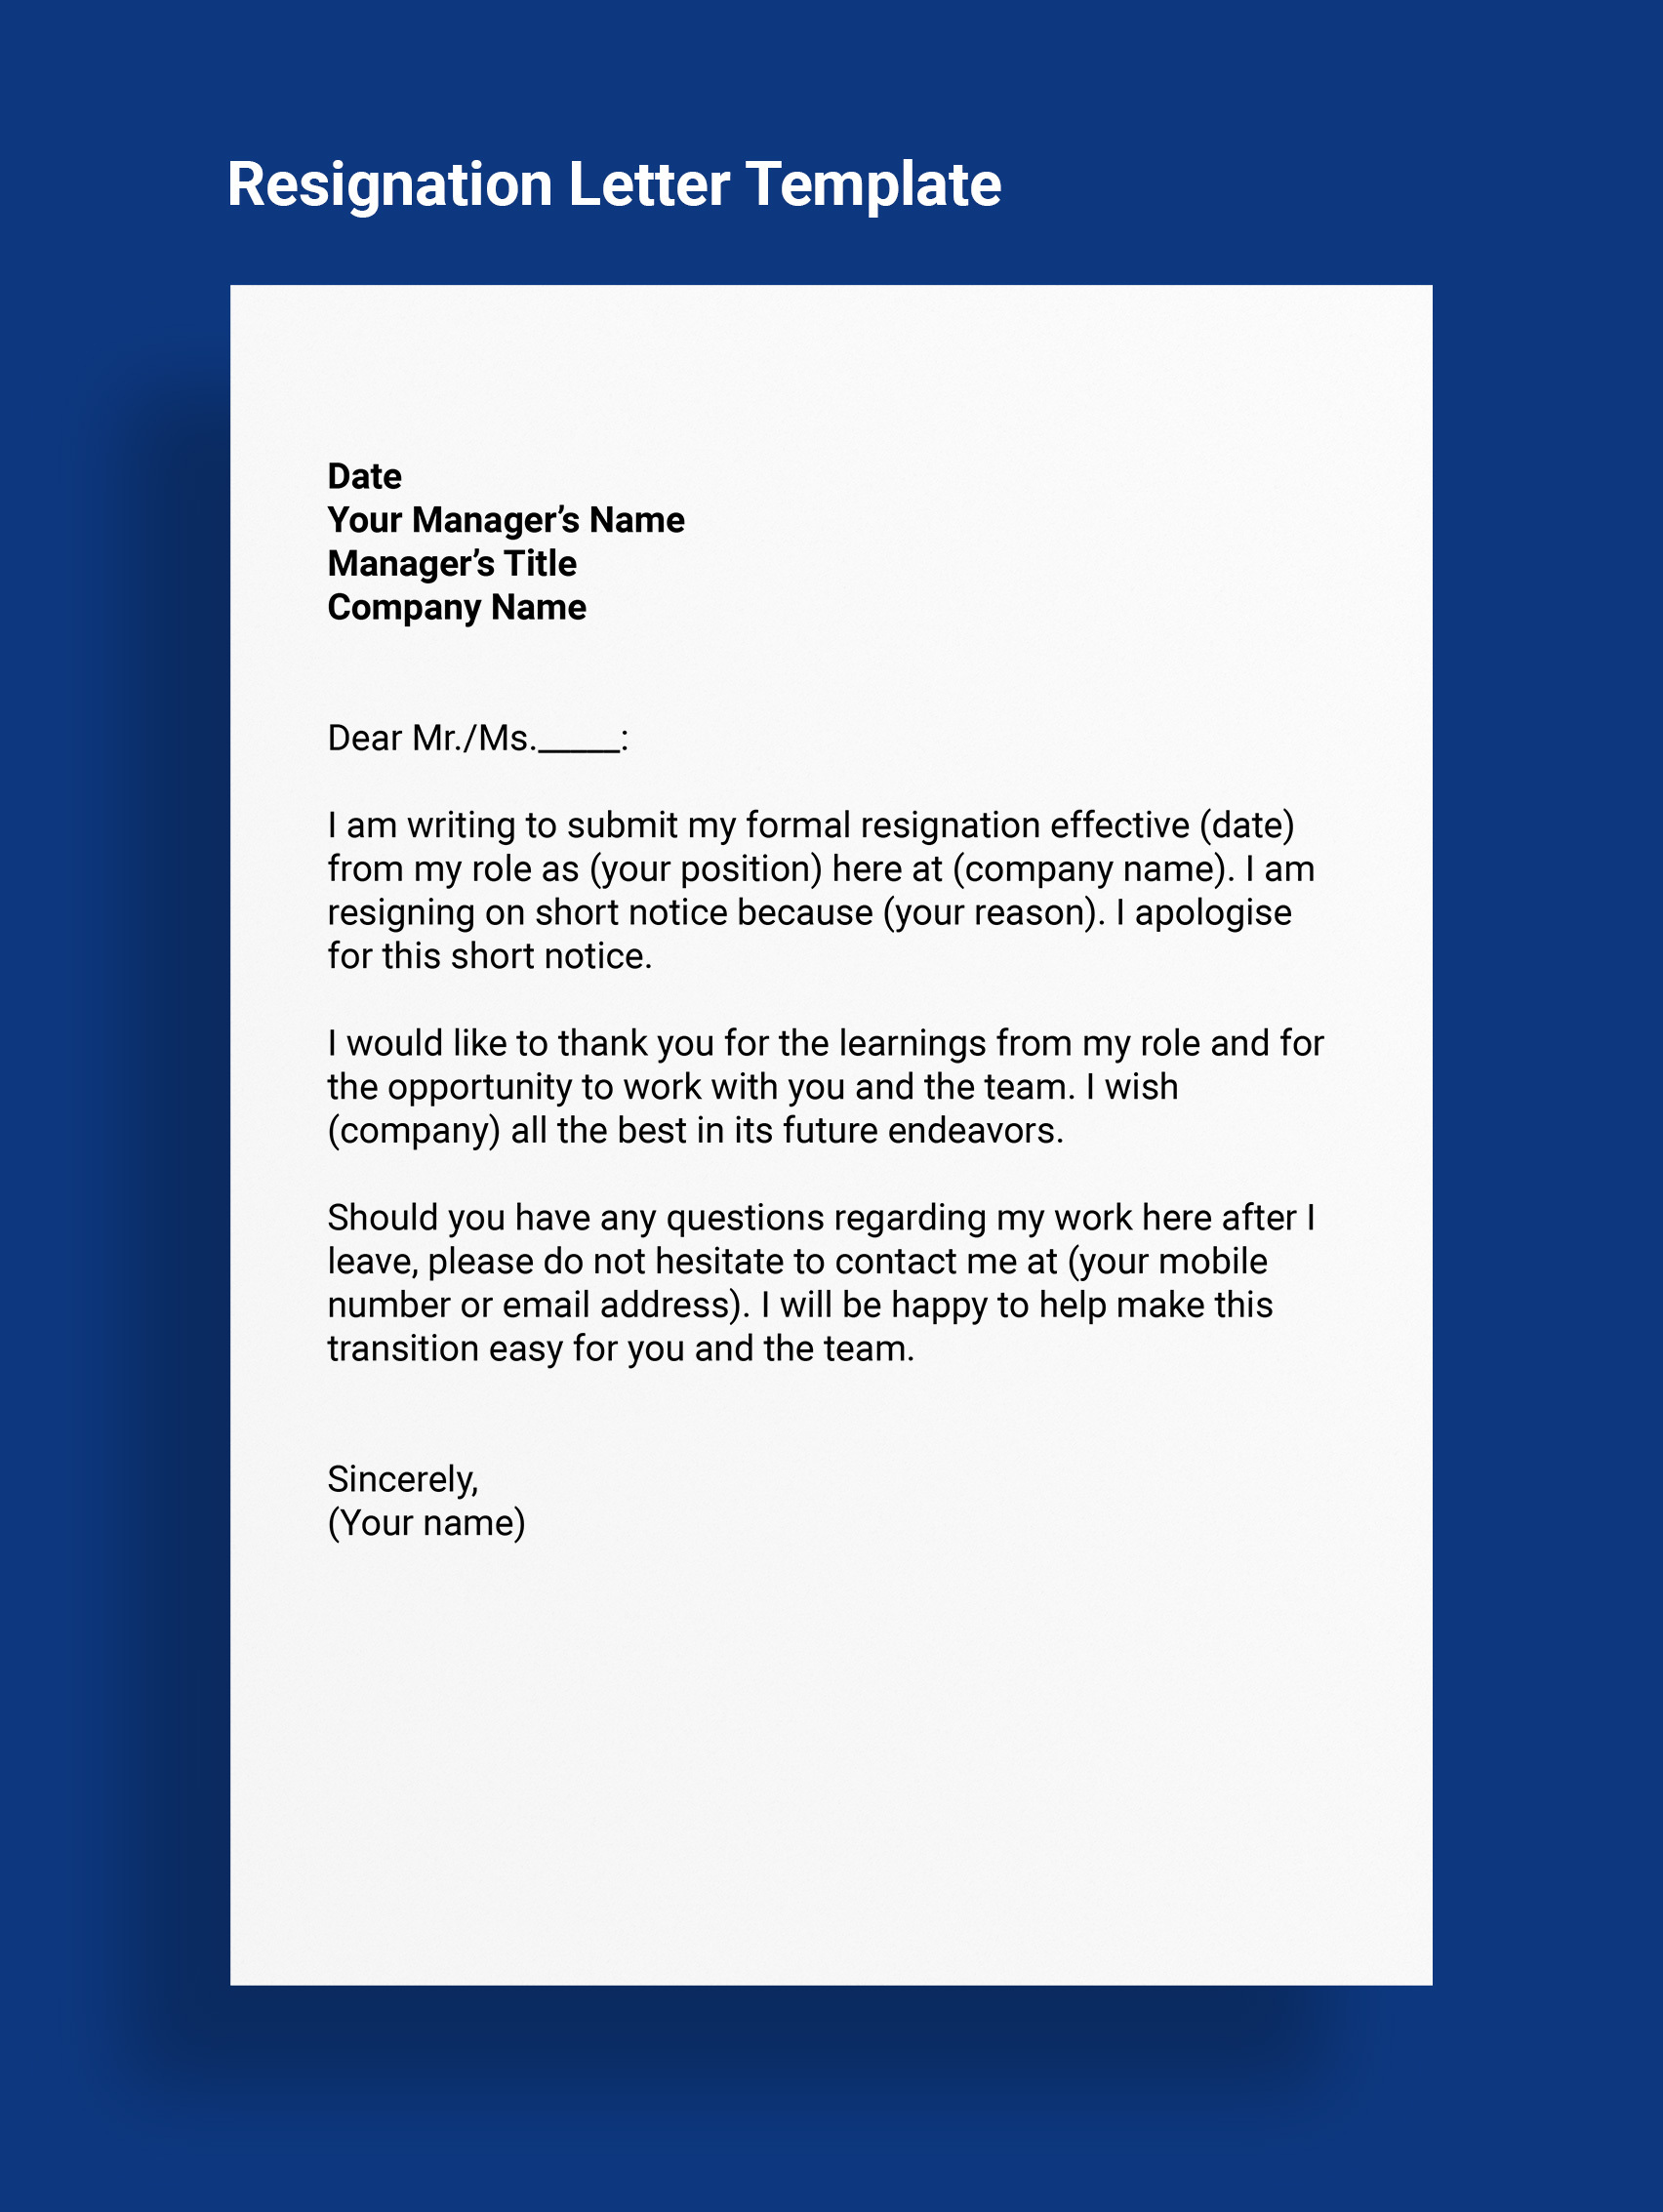 Resignation Letter Template Malaysia Everything You Need To Know About